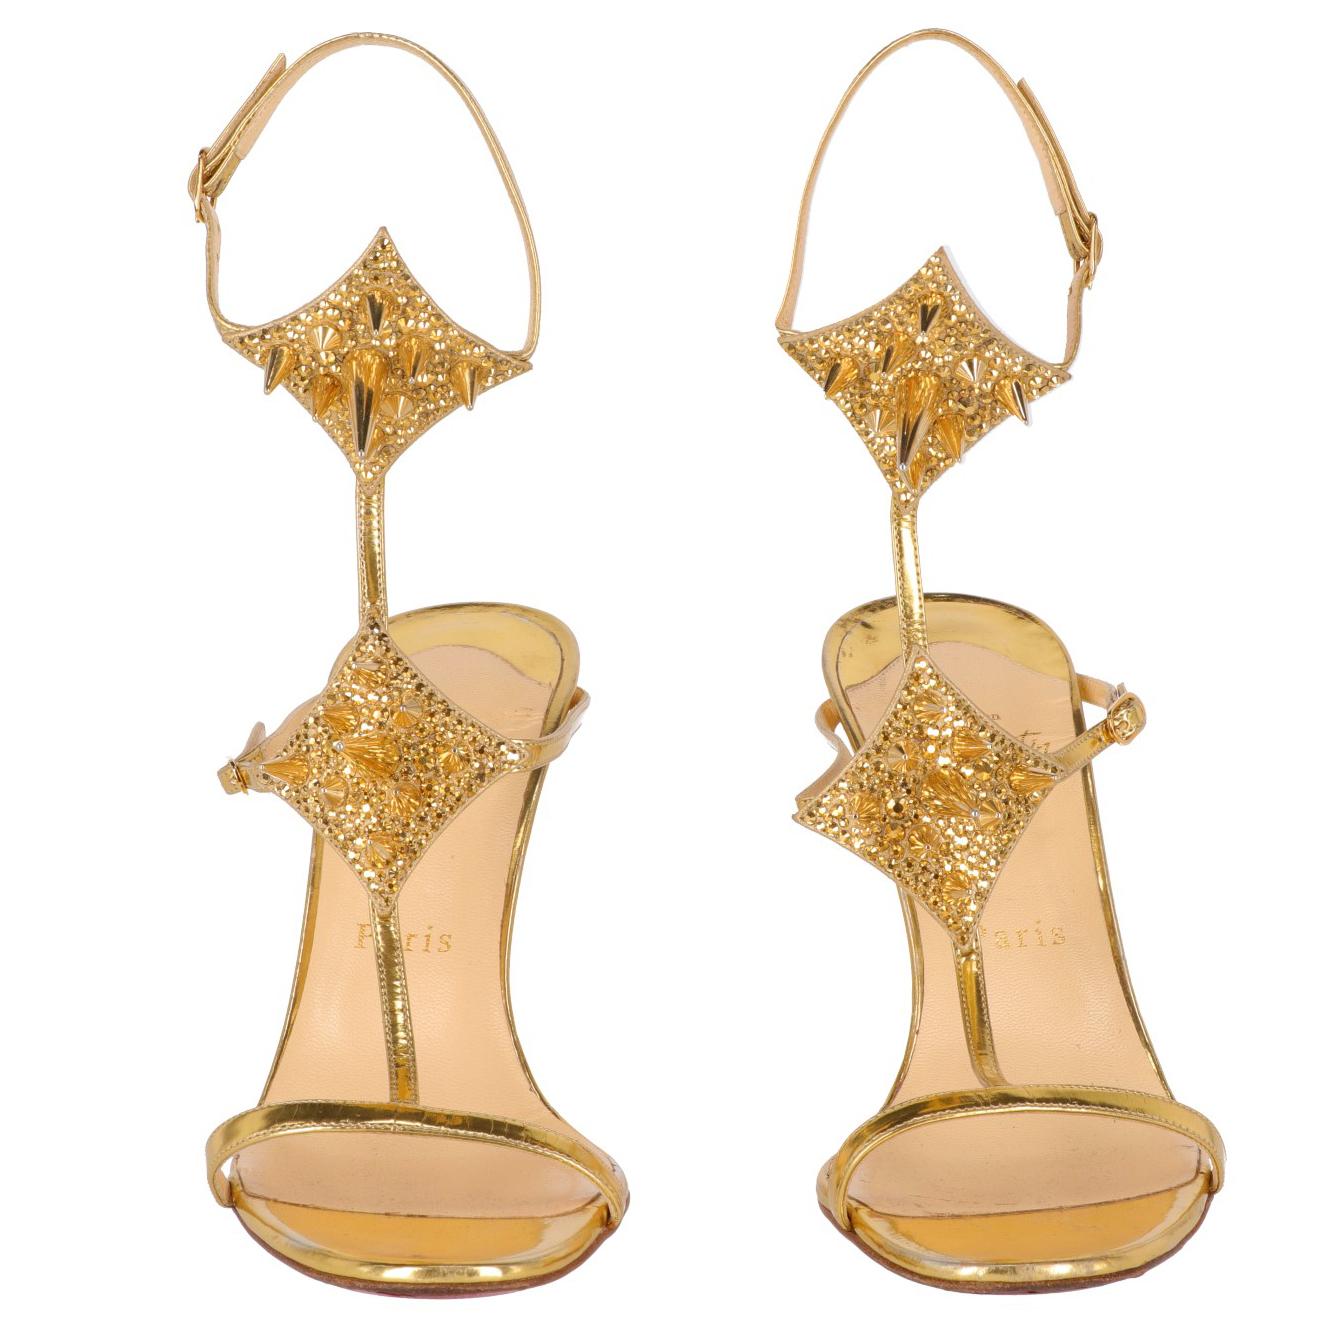 
The glamour Christian Louboutin gold-tone leather sandals feature a 11 cm high spike heel, an ankle string fastening and embellished by studs and rhinestones. 
The item shows some signs of wear on the insoles and light scratches at heels, as shown